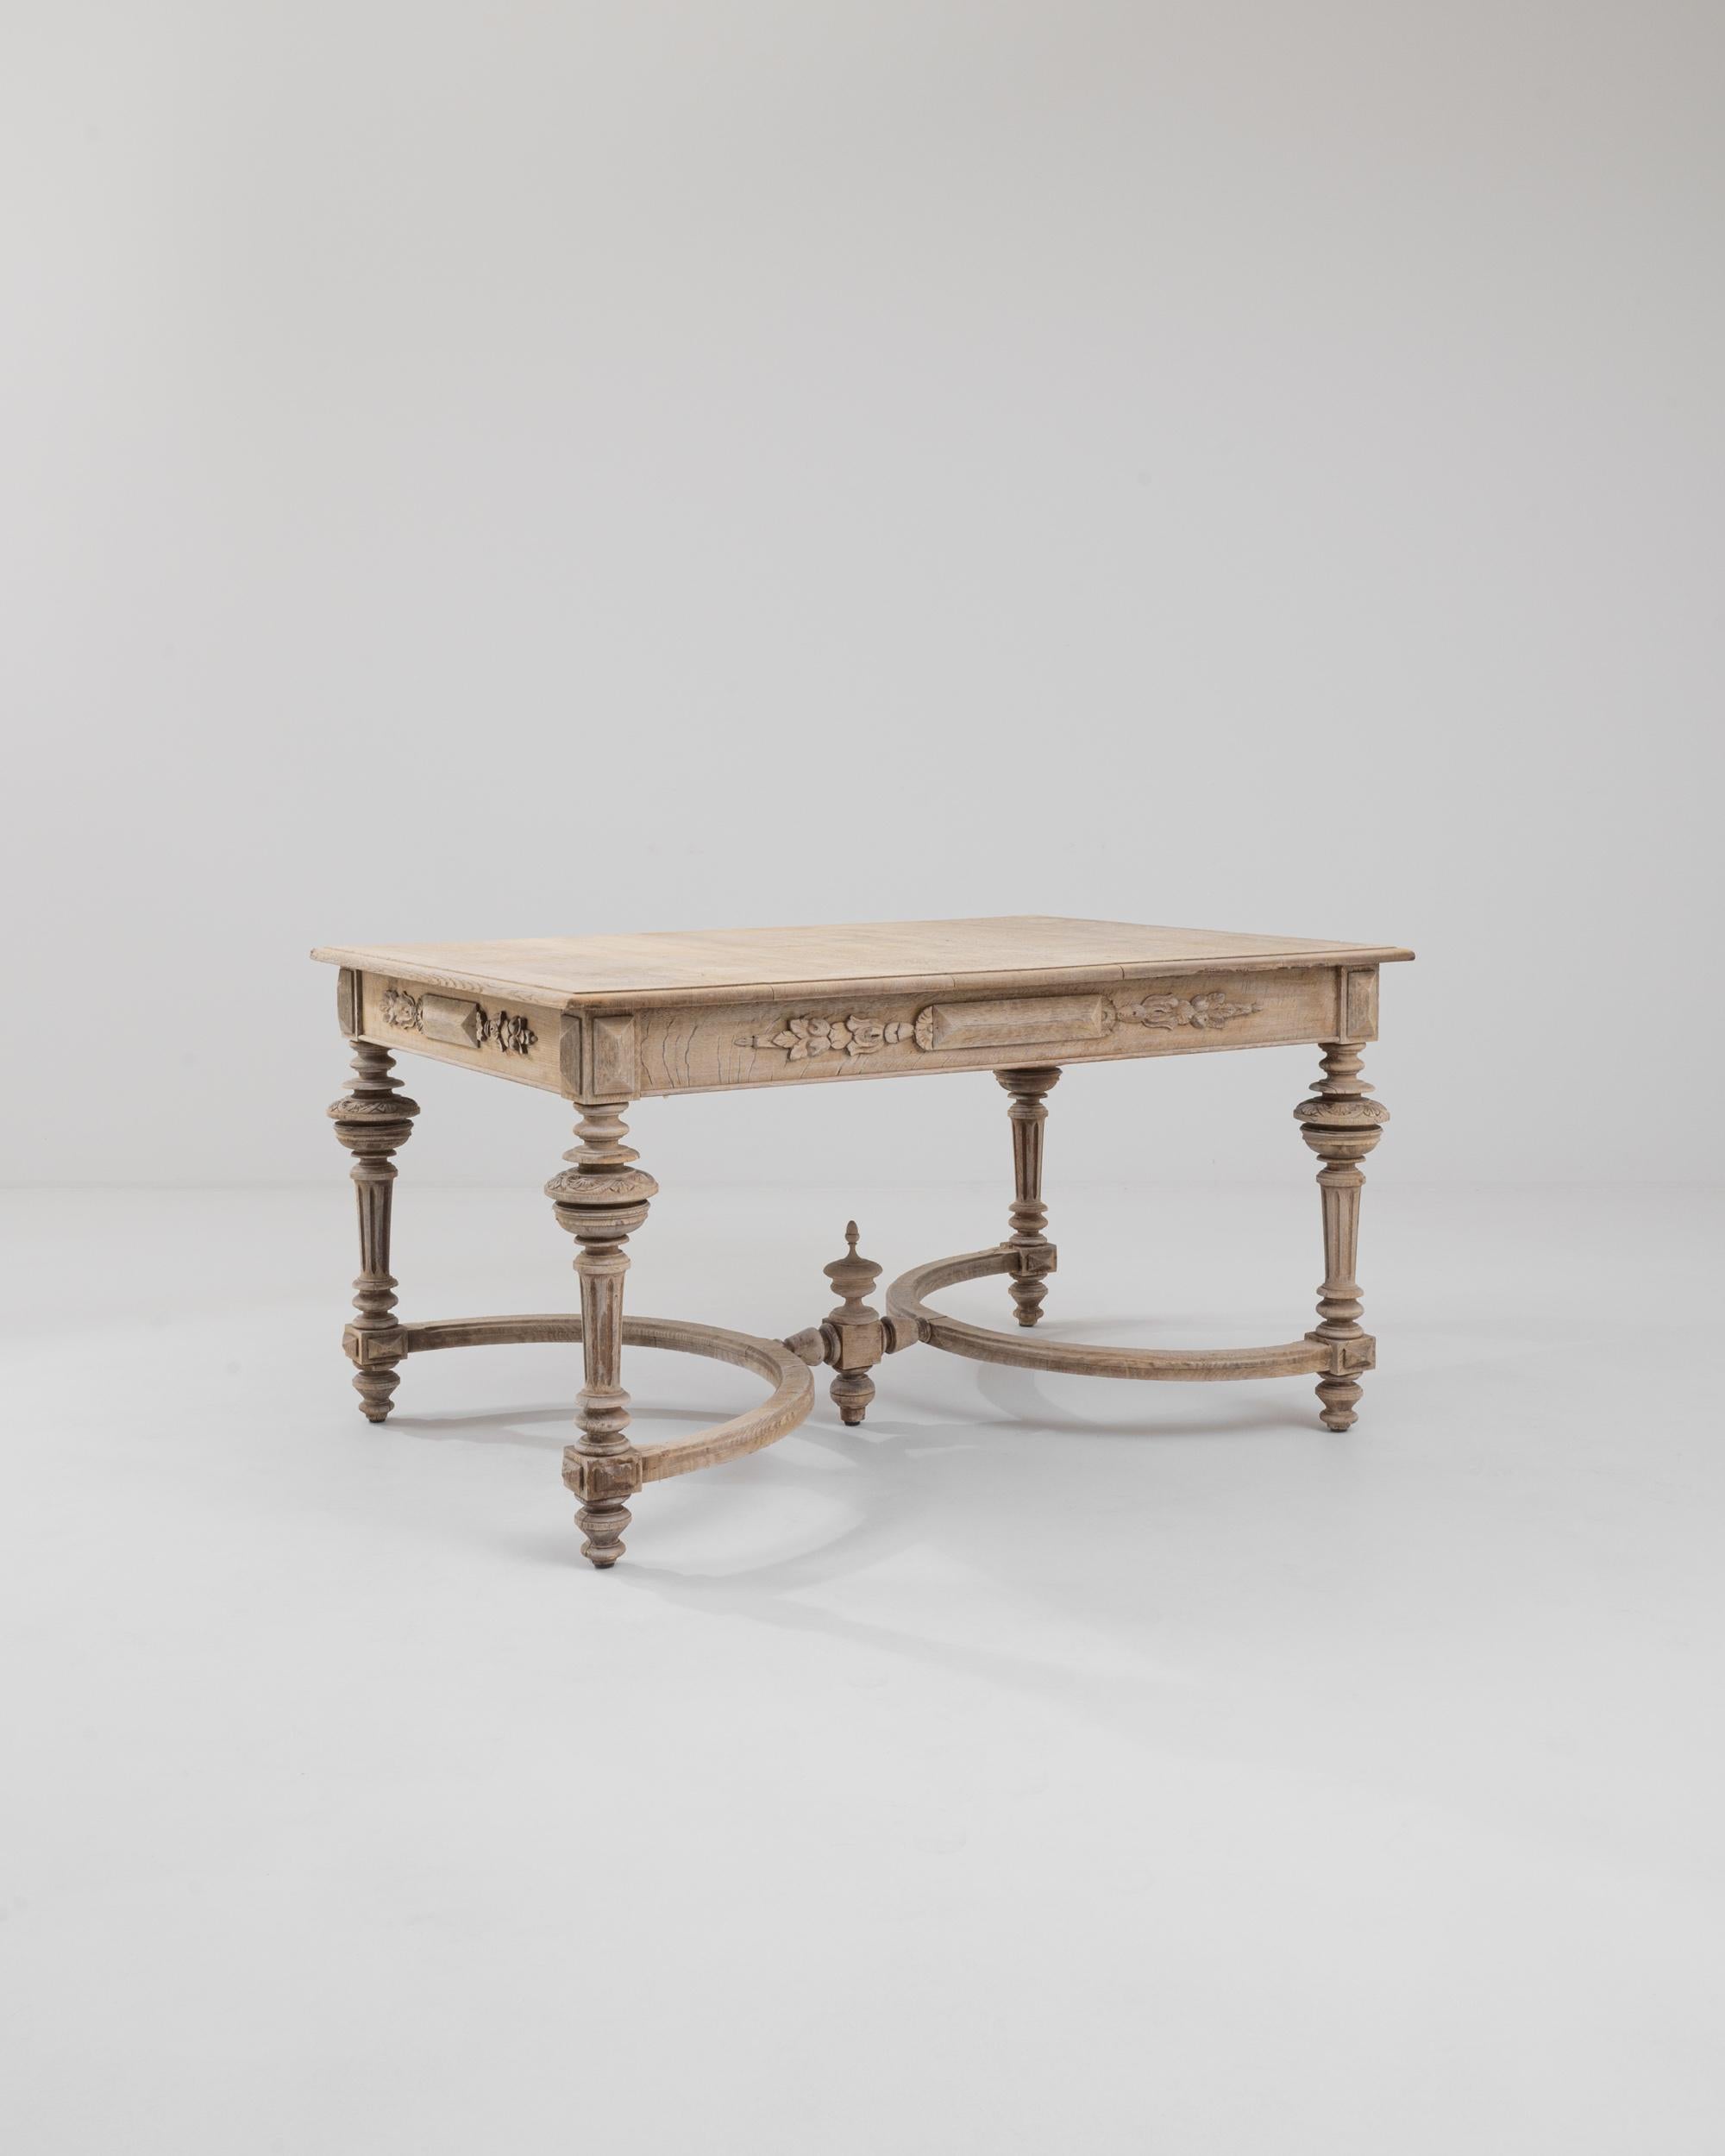 An oak dining table made in 19th century France. The swooping stretchers and beautifully lathed legs support a clean and unadorned oak top. Ornate floral motifs have been lovingly hand-carved into the aprons of the table, brought to new life by